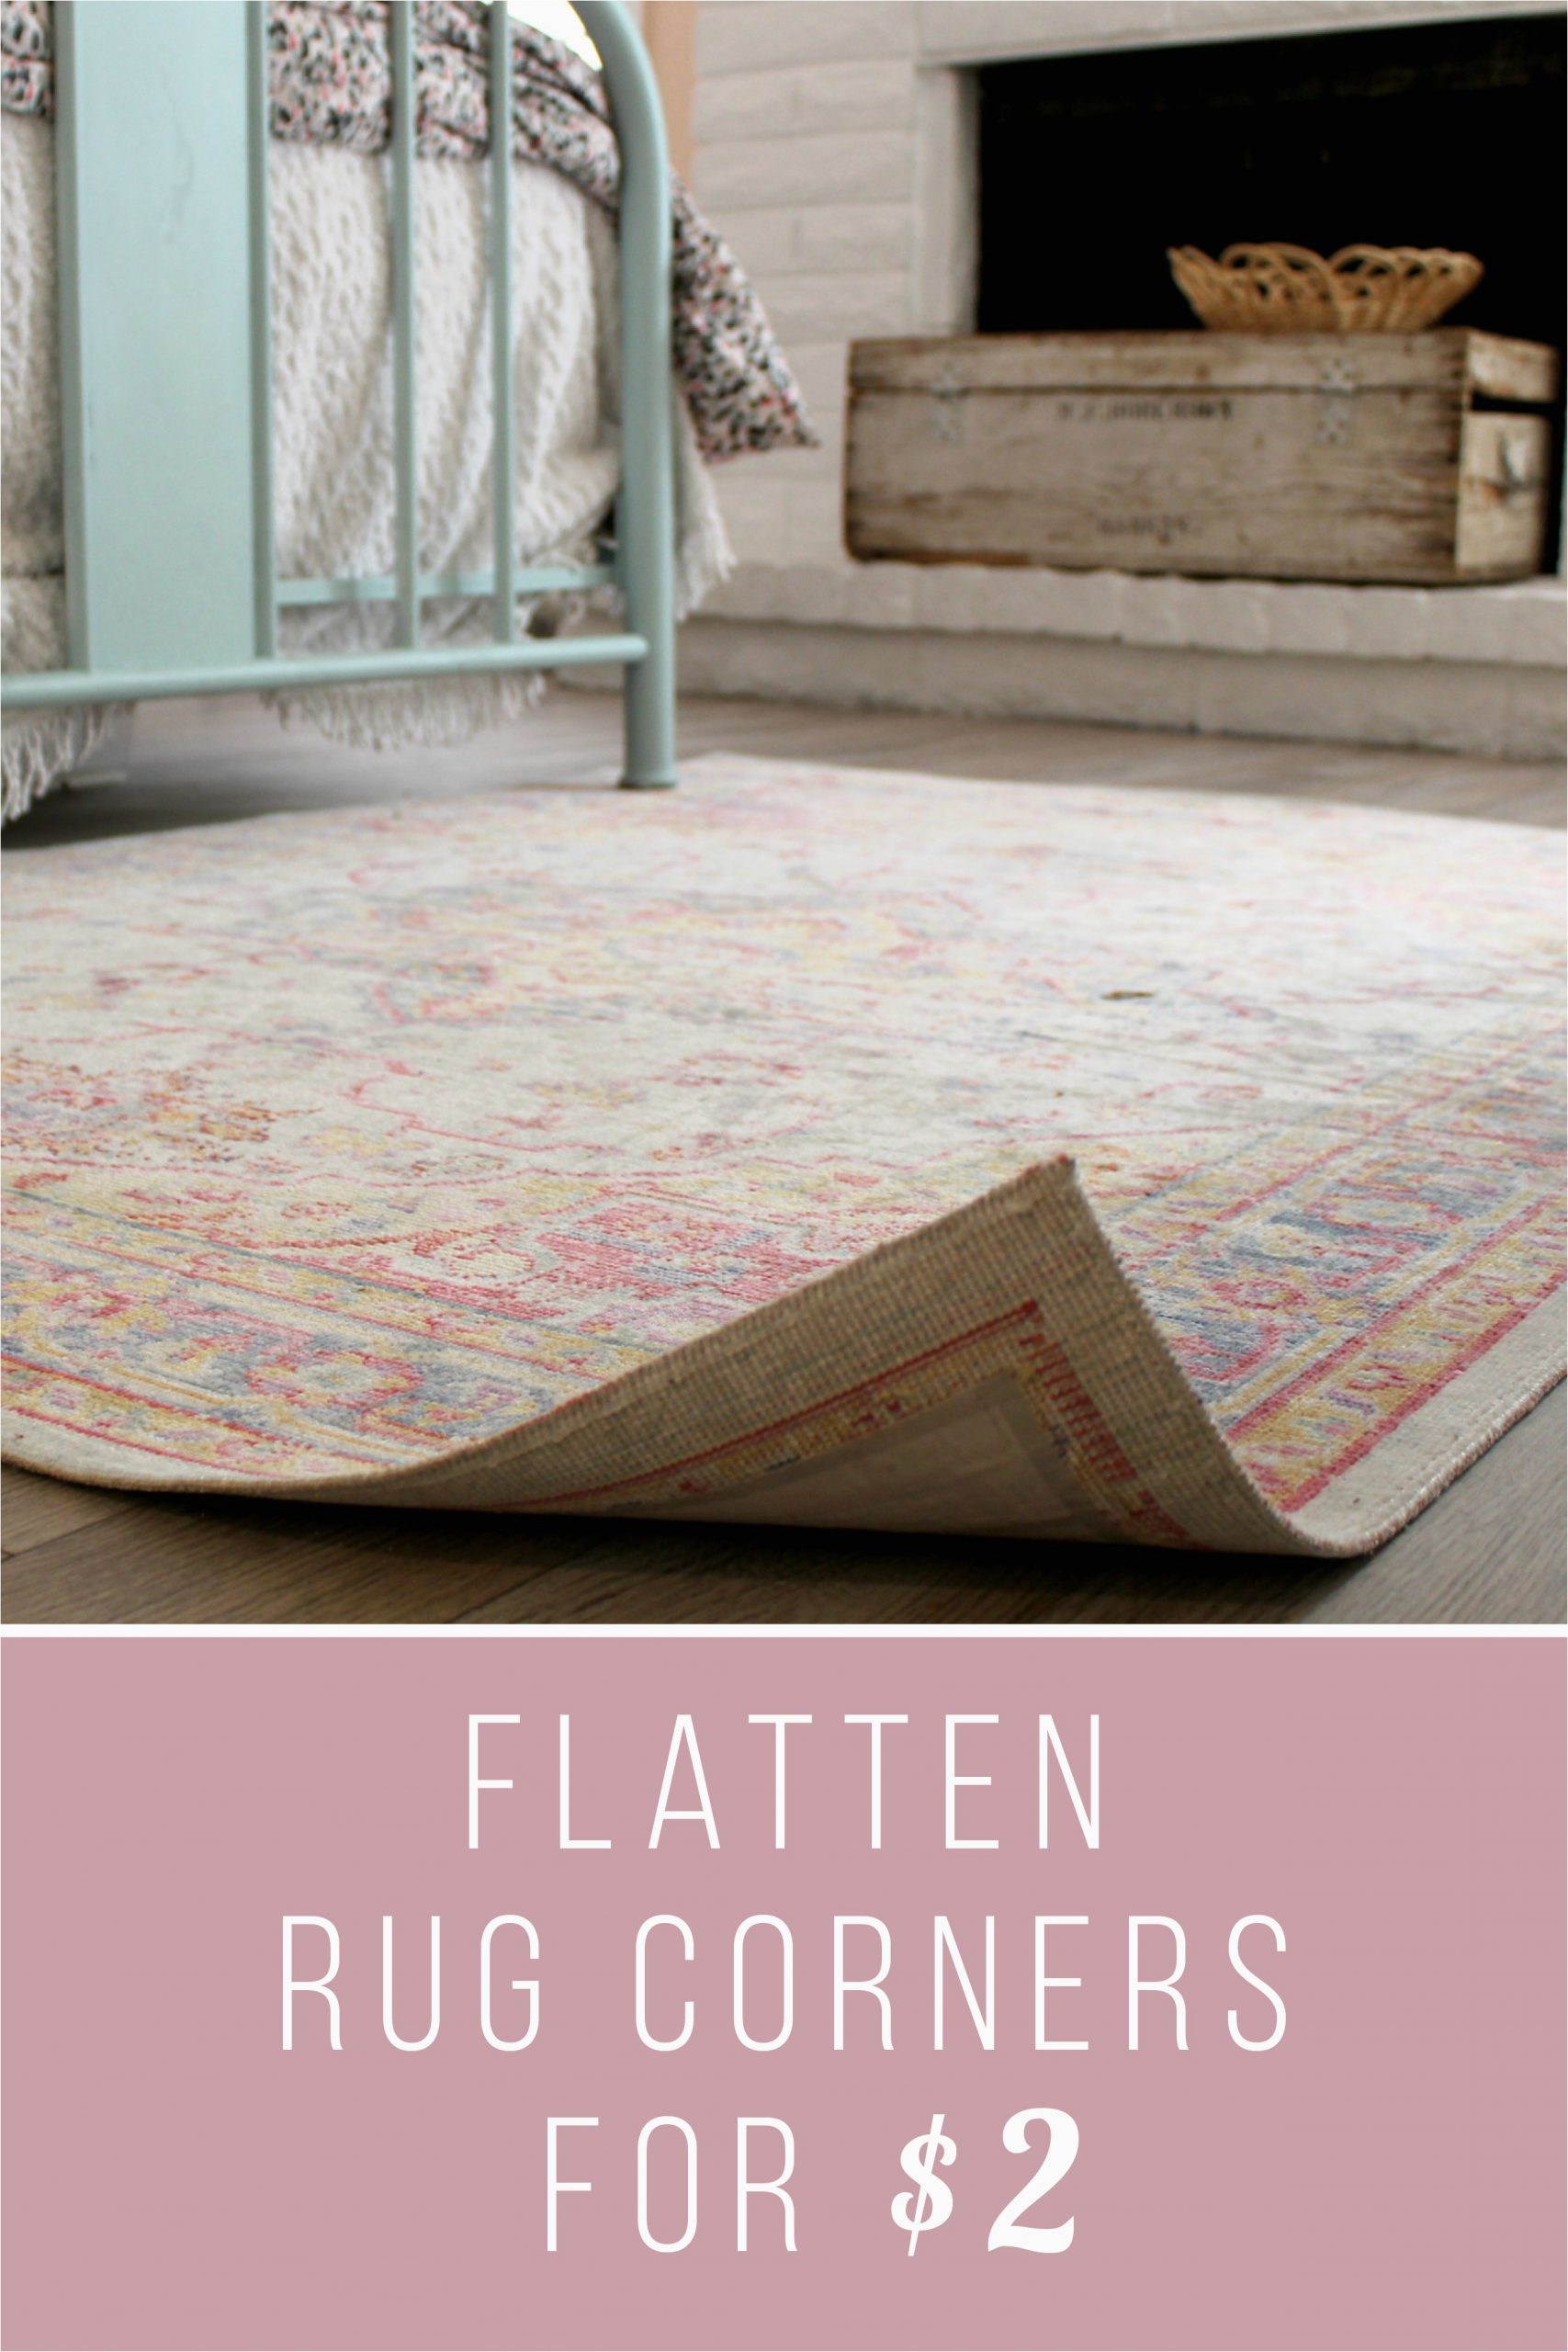 Area Rug Edges Curling Up Flatten Rug Corners for $2 Barefoot Blonde by Amber